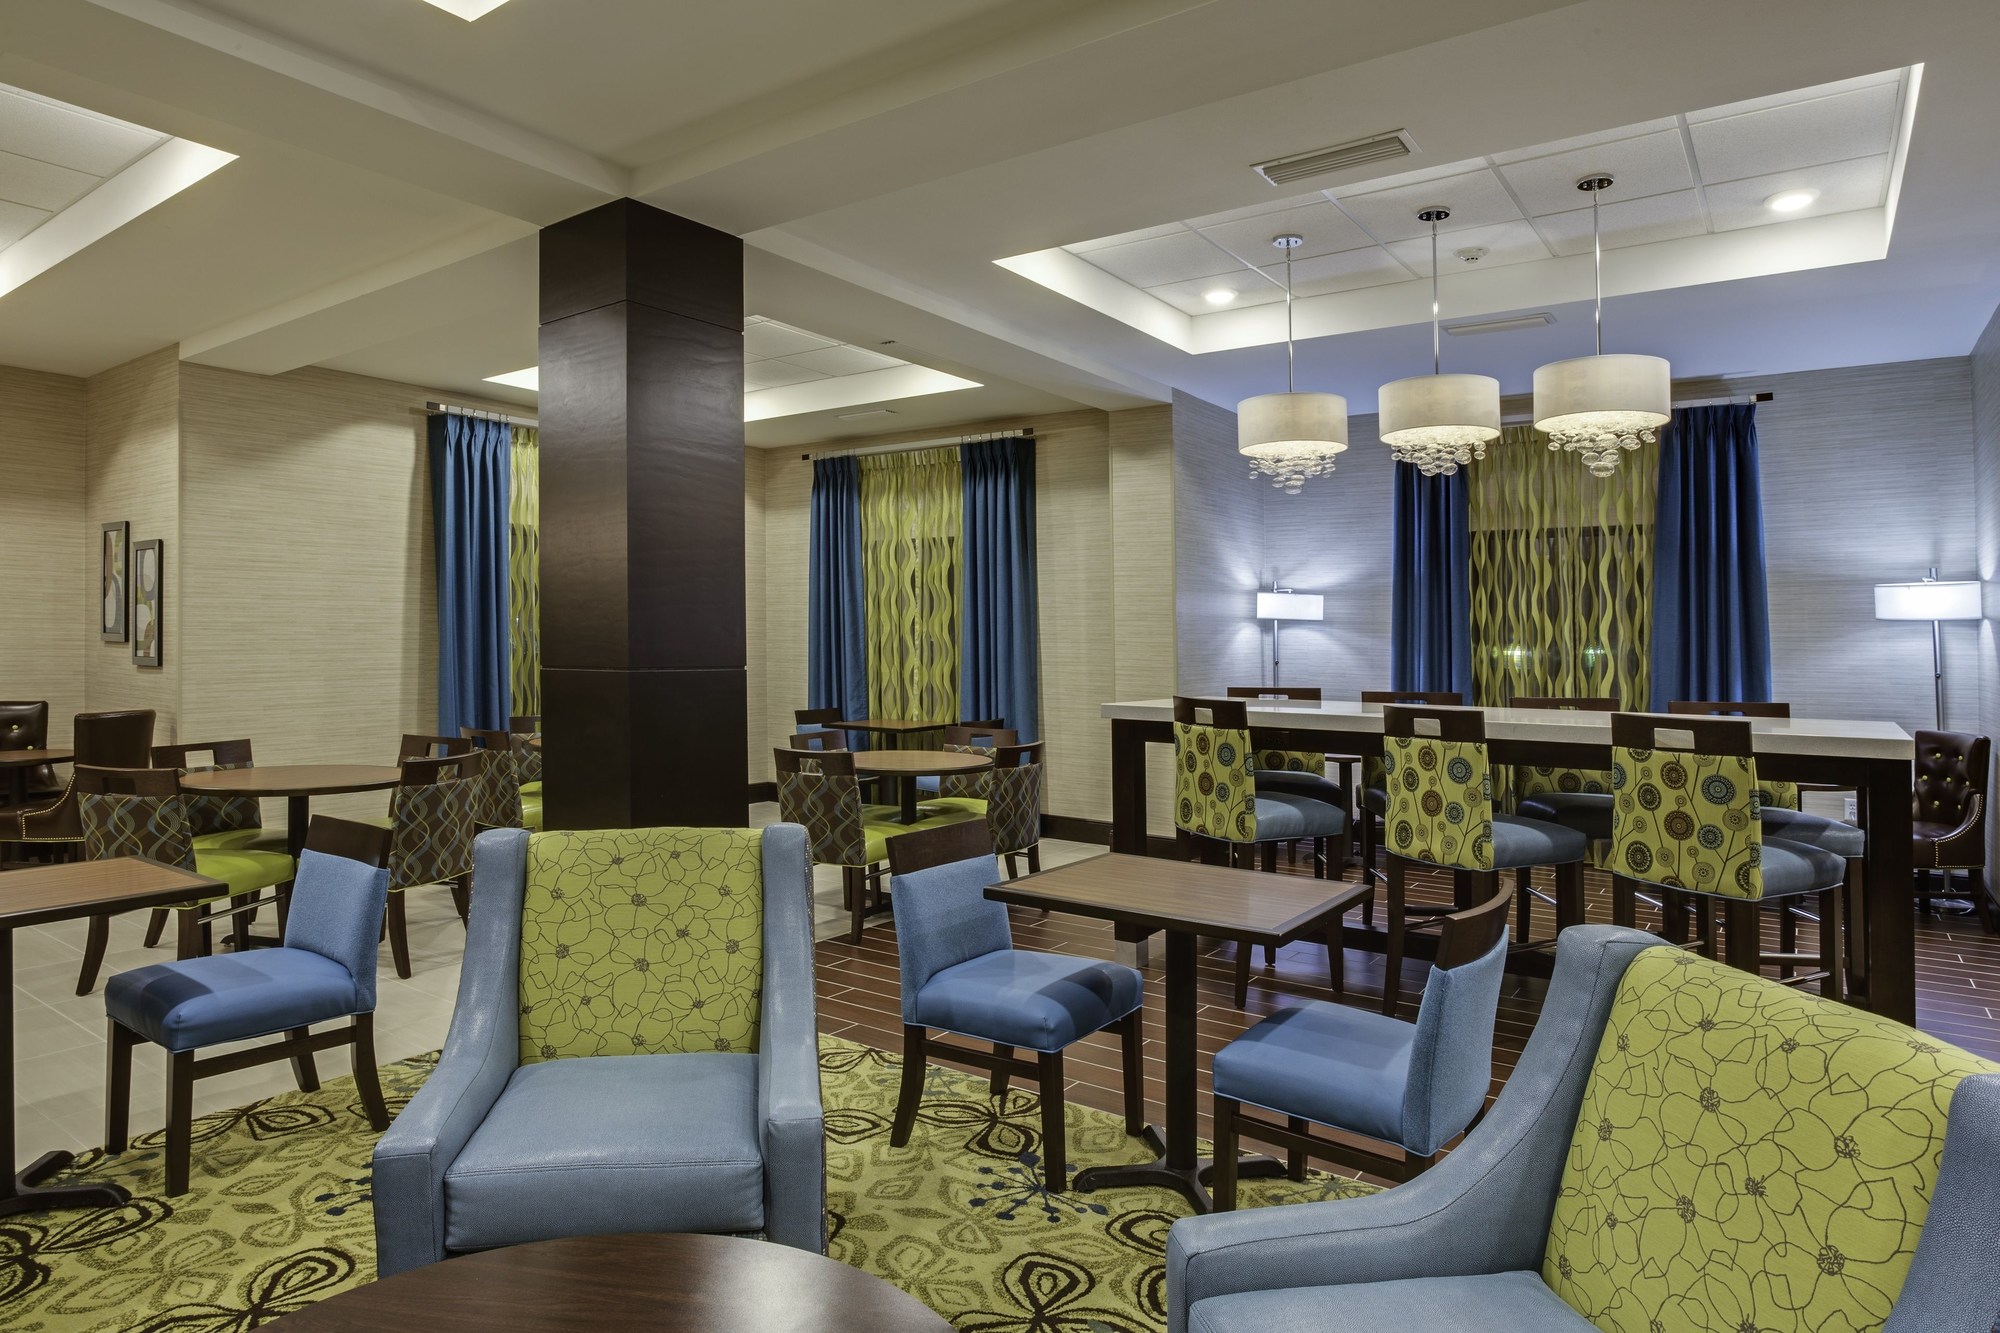 Holiday Inn Express & Suites Orlando East-UCF Area